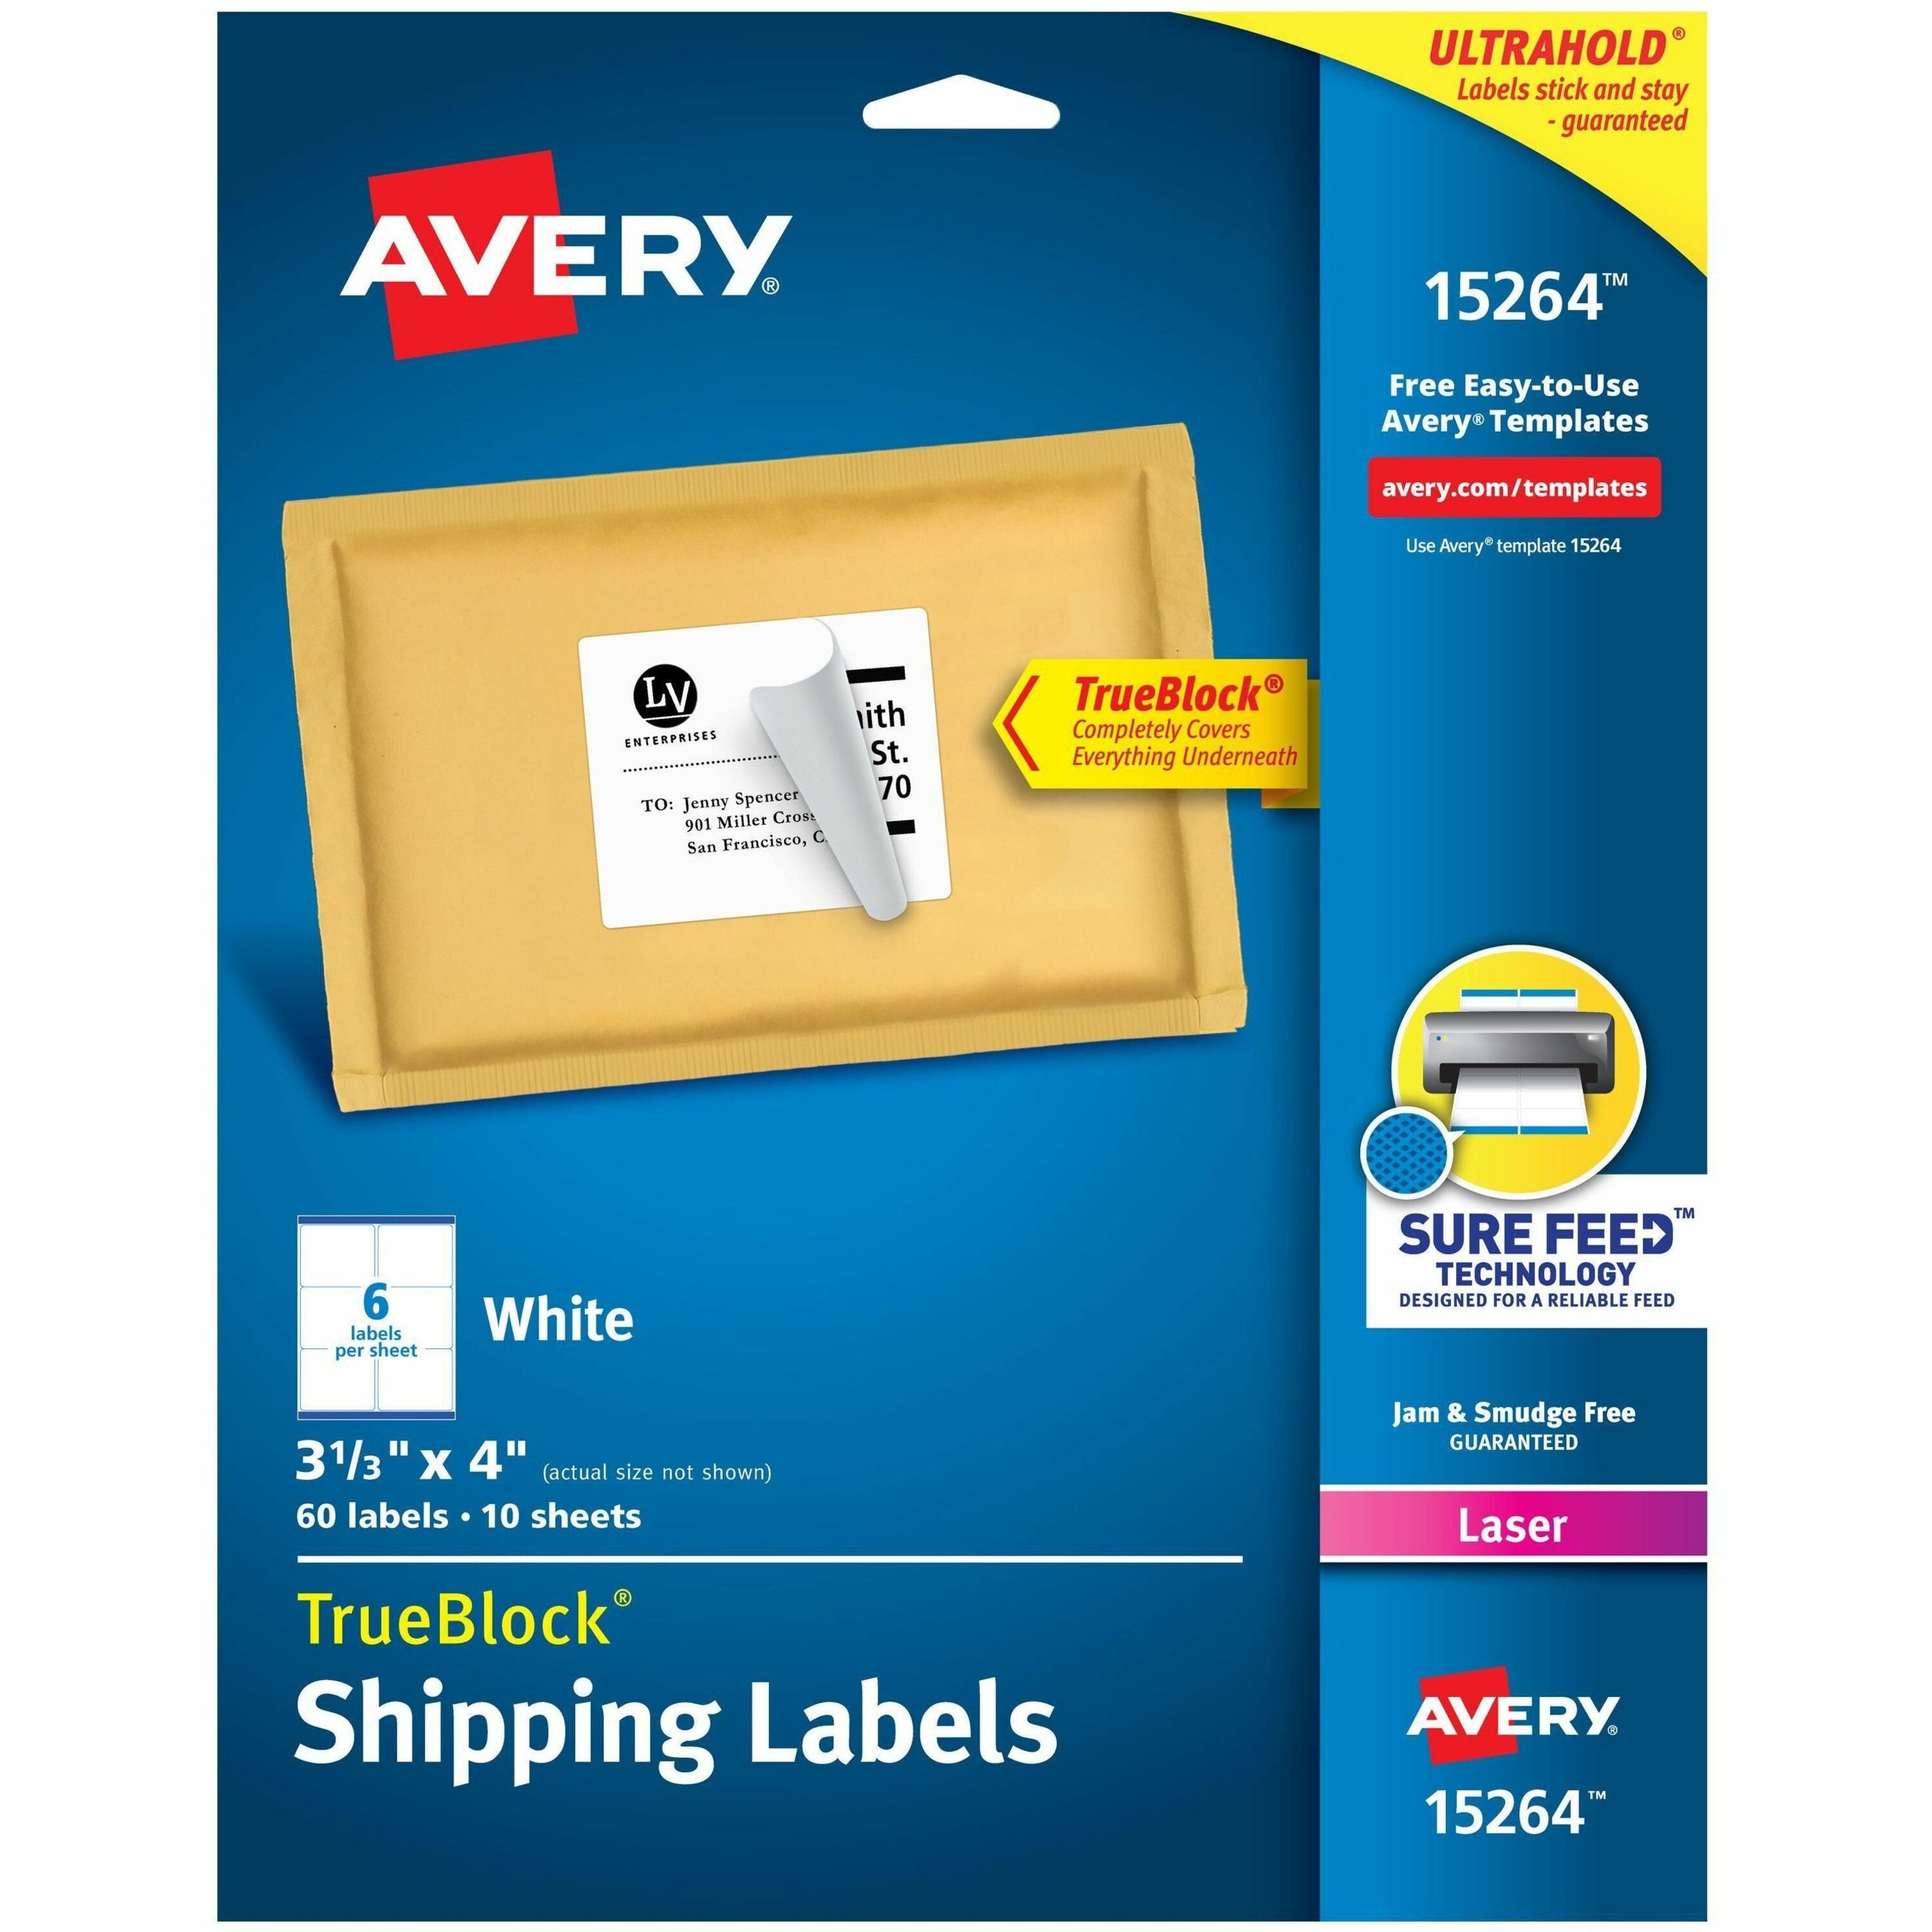 avery-trueblock-shipping-labels-sure-feed-technology-permanent-adhesive-3-1-3-x-4--60-labels-15264-avery-shipping-labels-sure-feed-3-1-3-x-4--60-white-labels-15264_ave15264 - 1